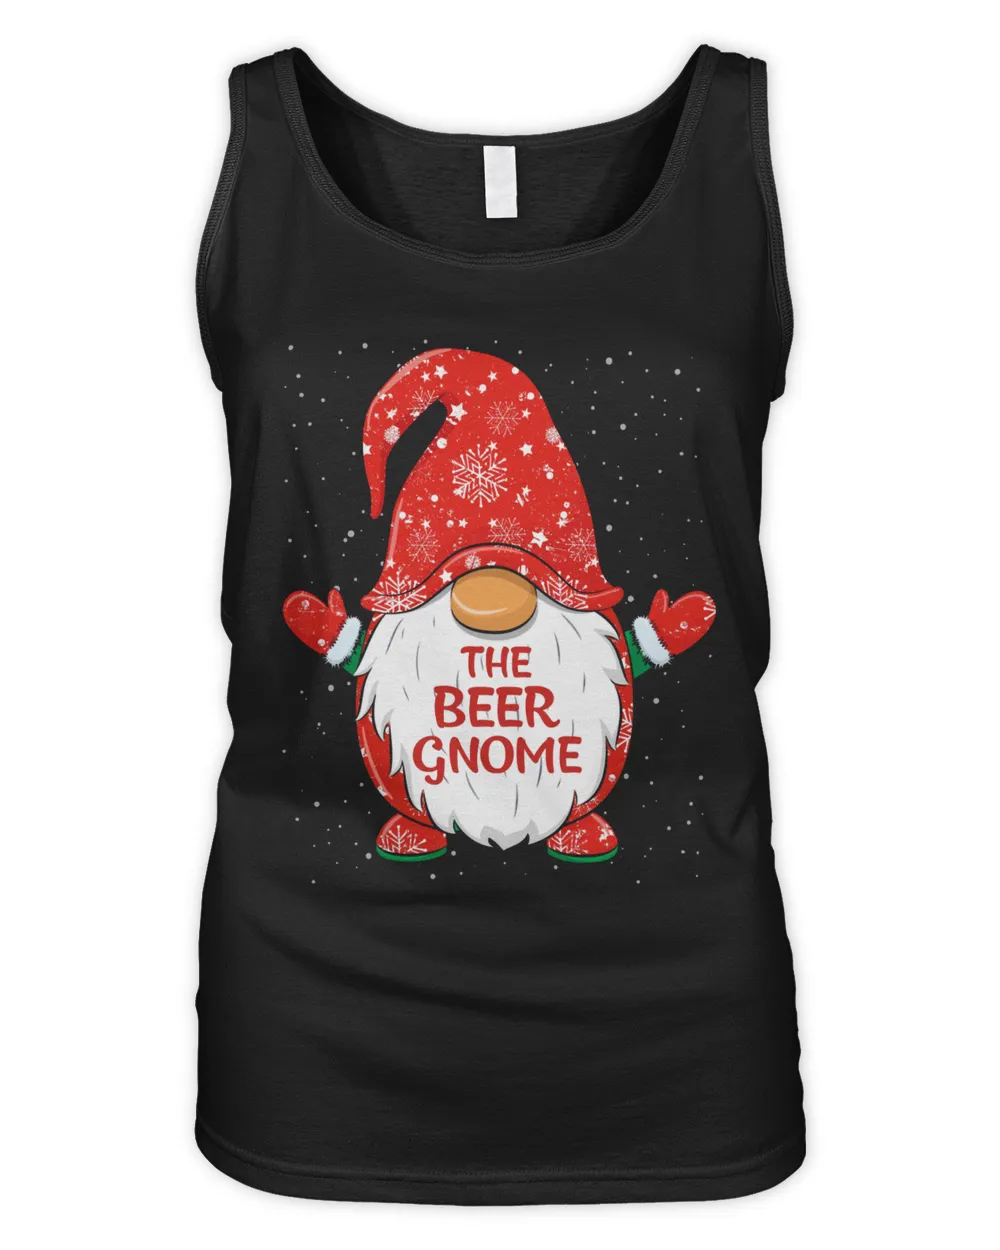 The Beer Gnome Family Matching Christmas Party Pajama Xmas Gift